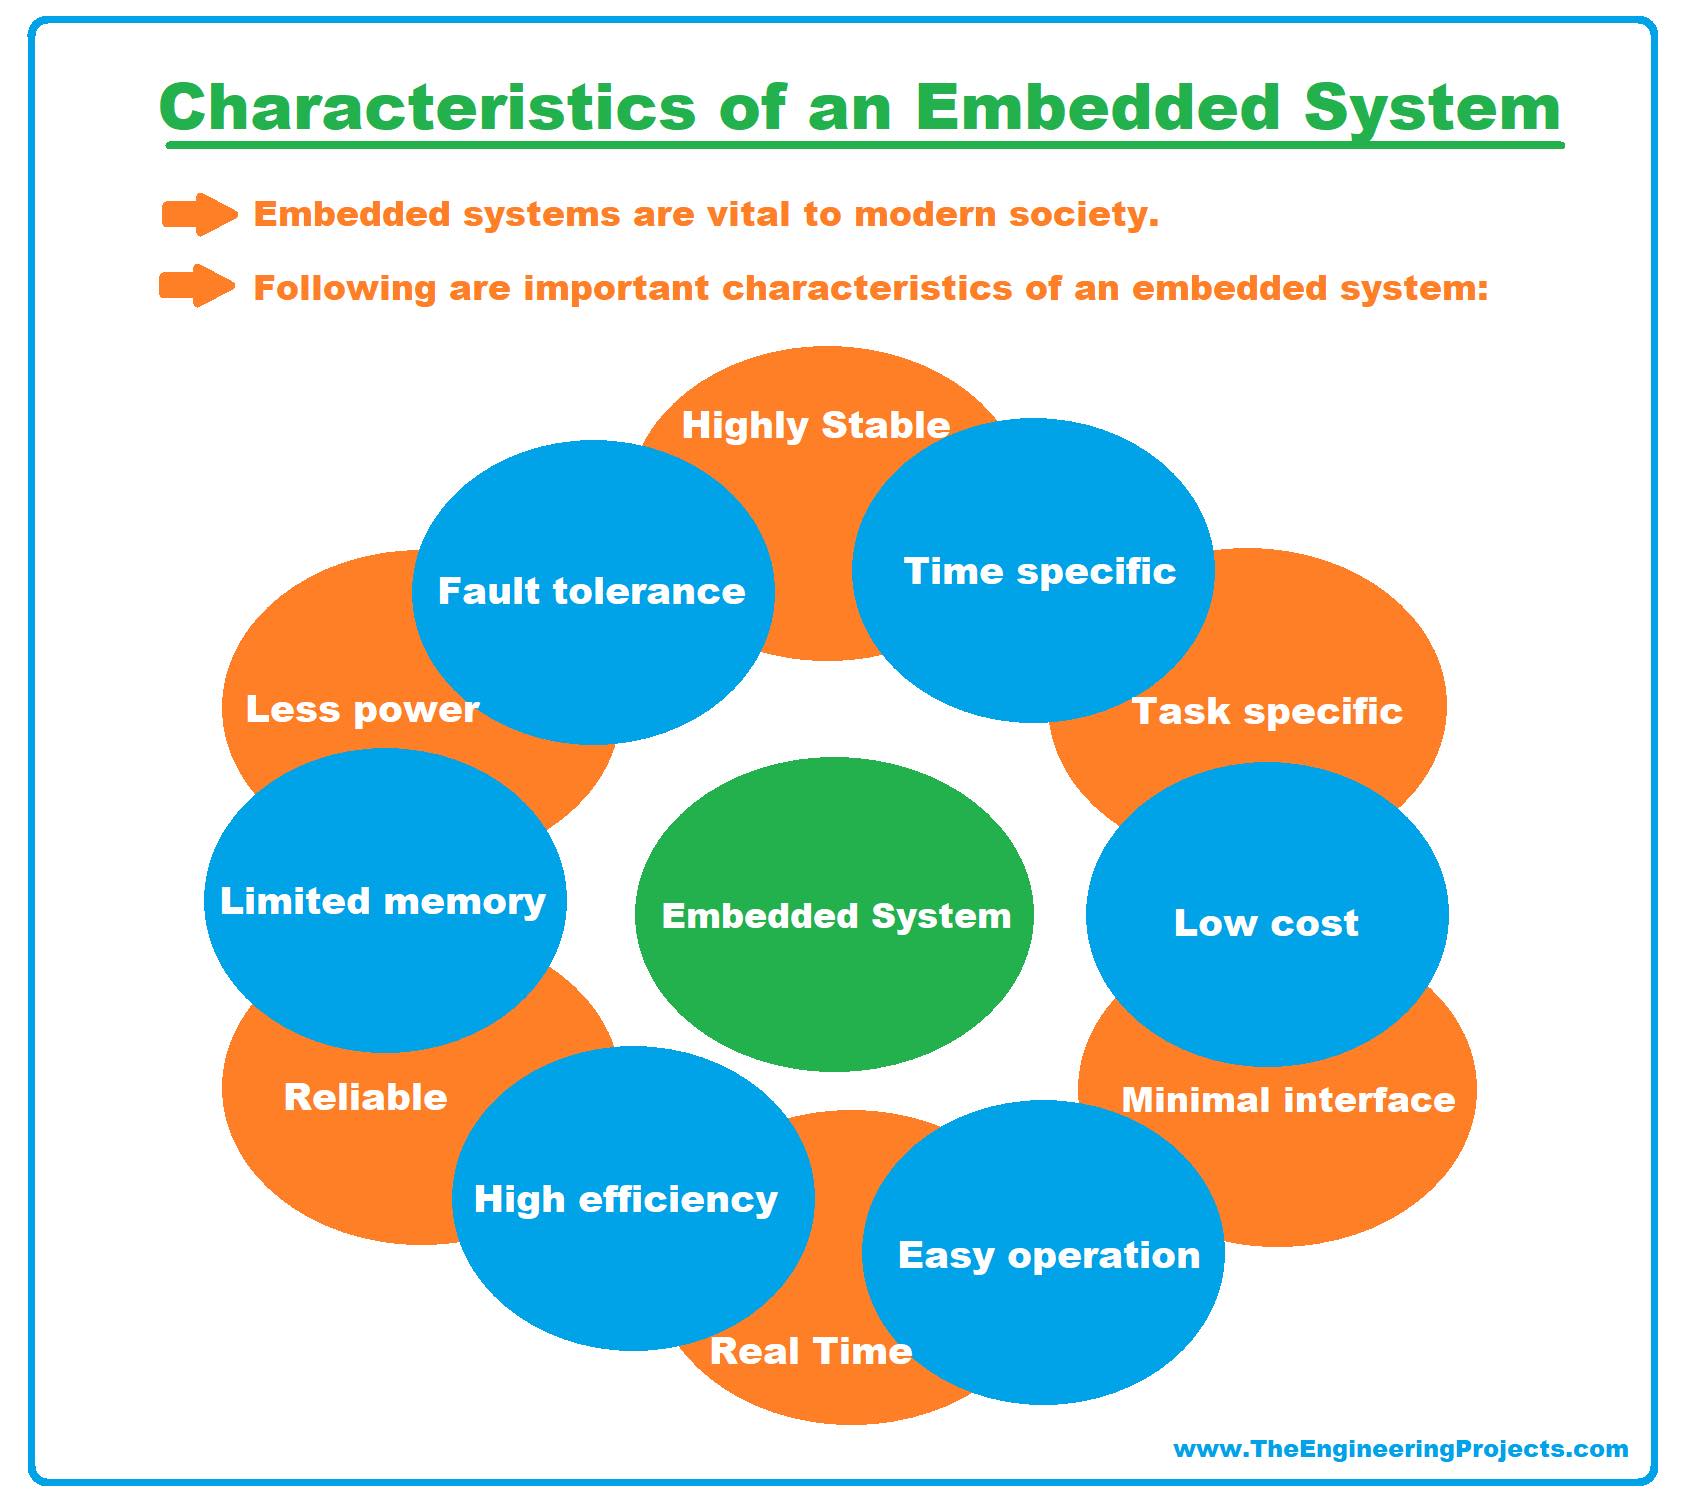 embedded system, embedded systems, what is embedded system, what is an embedded system, basics of embedded system, characteristics of embedded systems, embedded systems characteristics